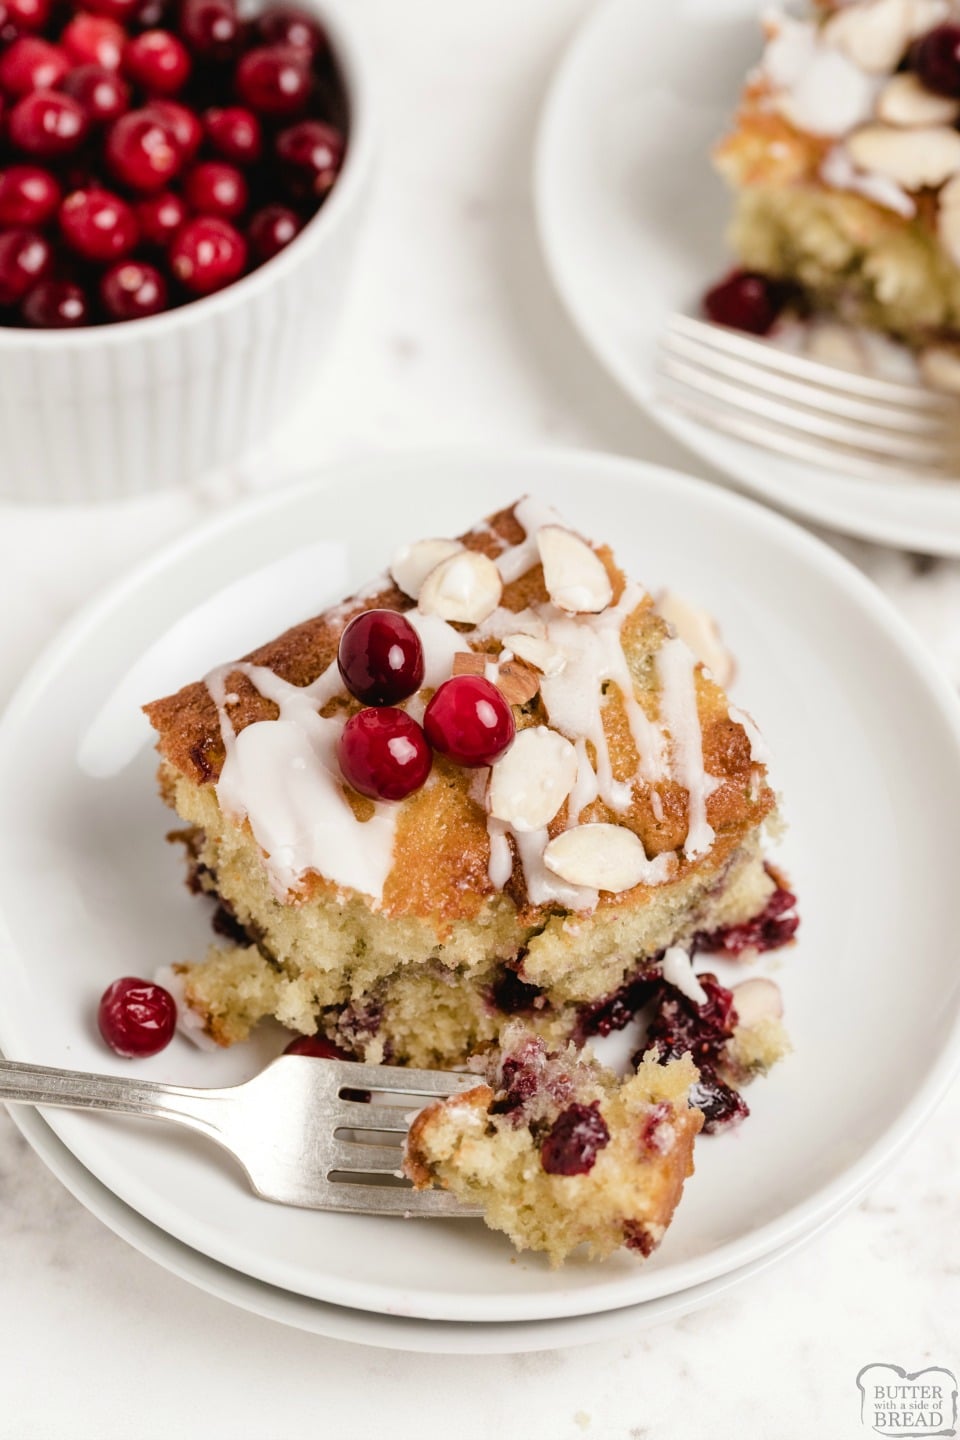 Orange and Cranberry Butter Cake recipe by Flours Frostings at BetterButter